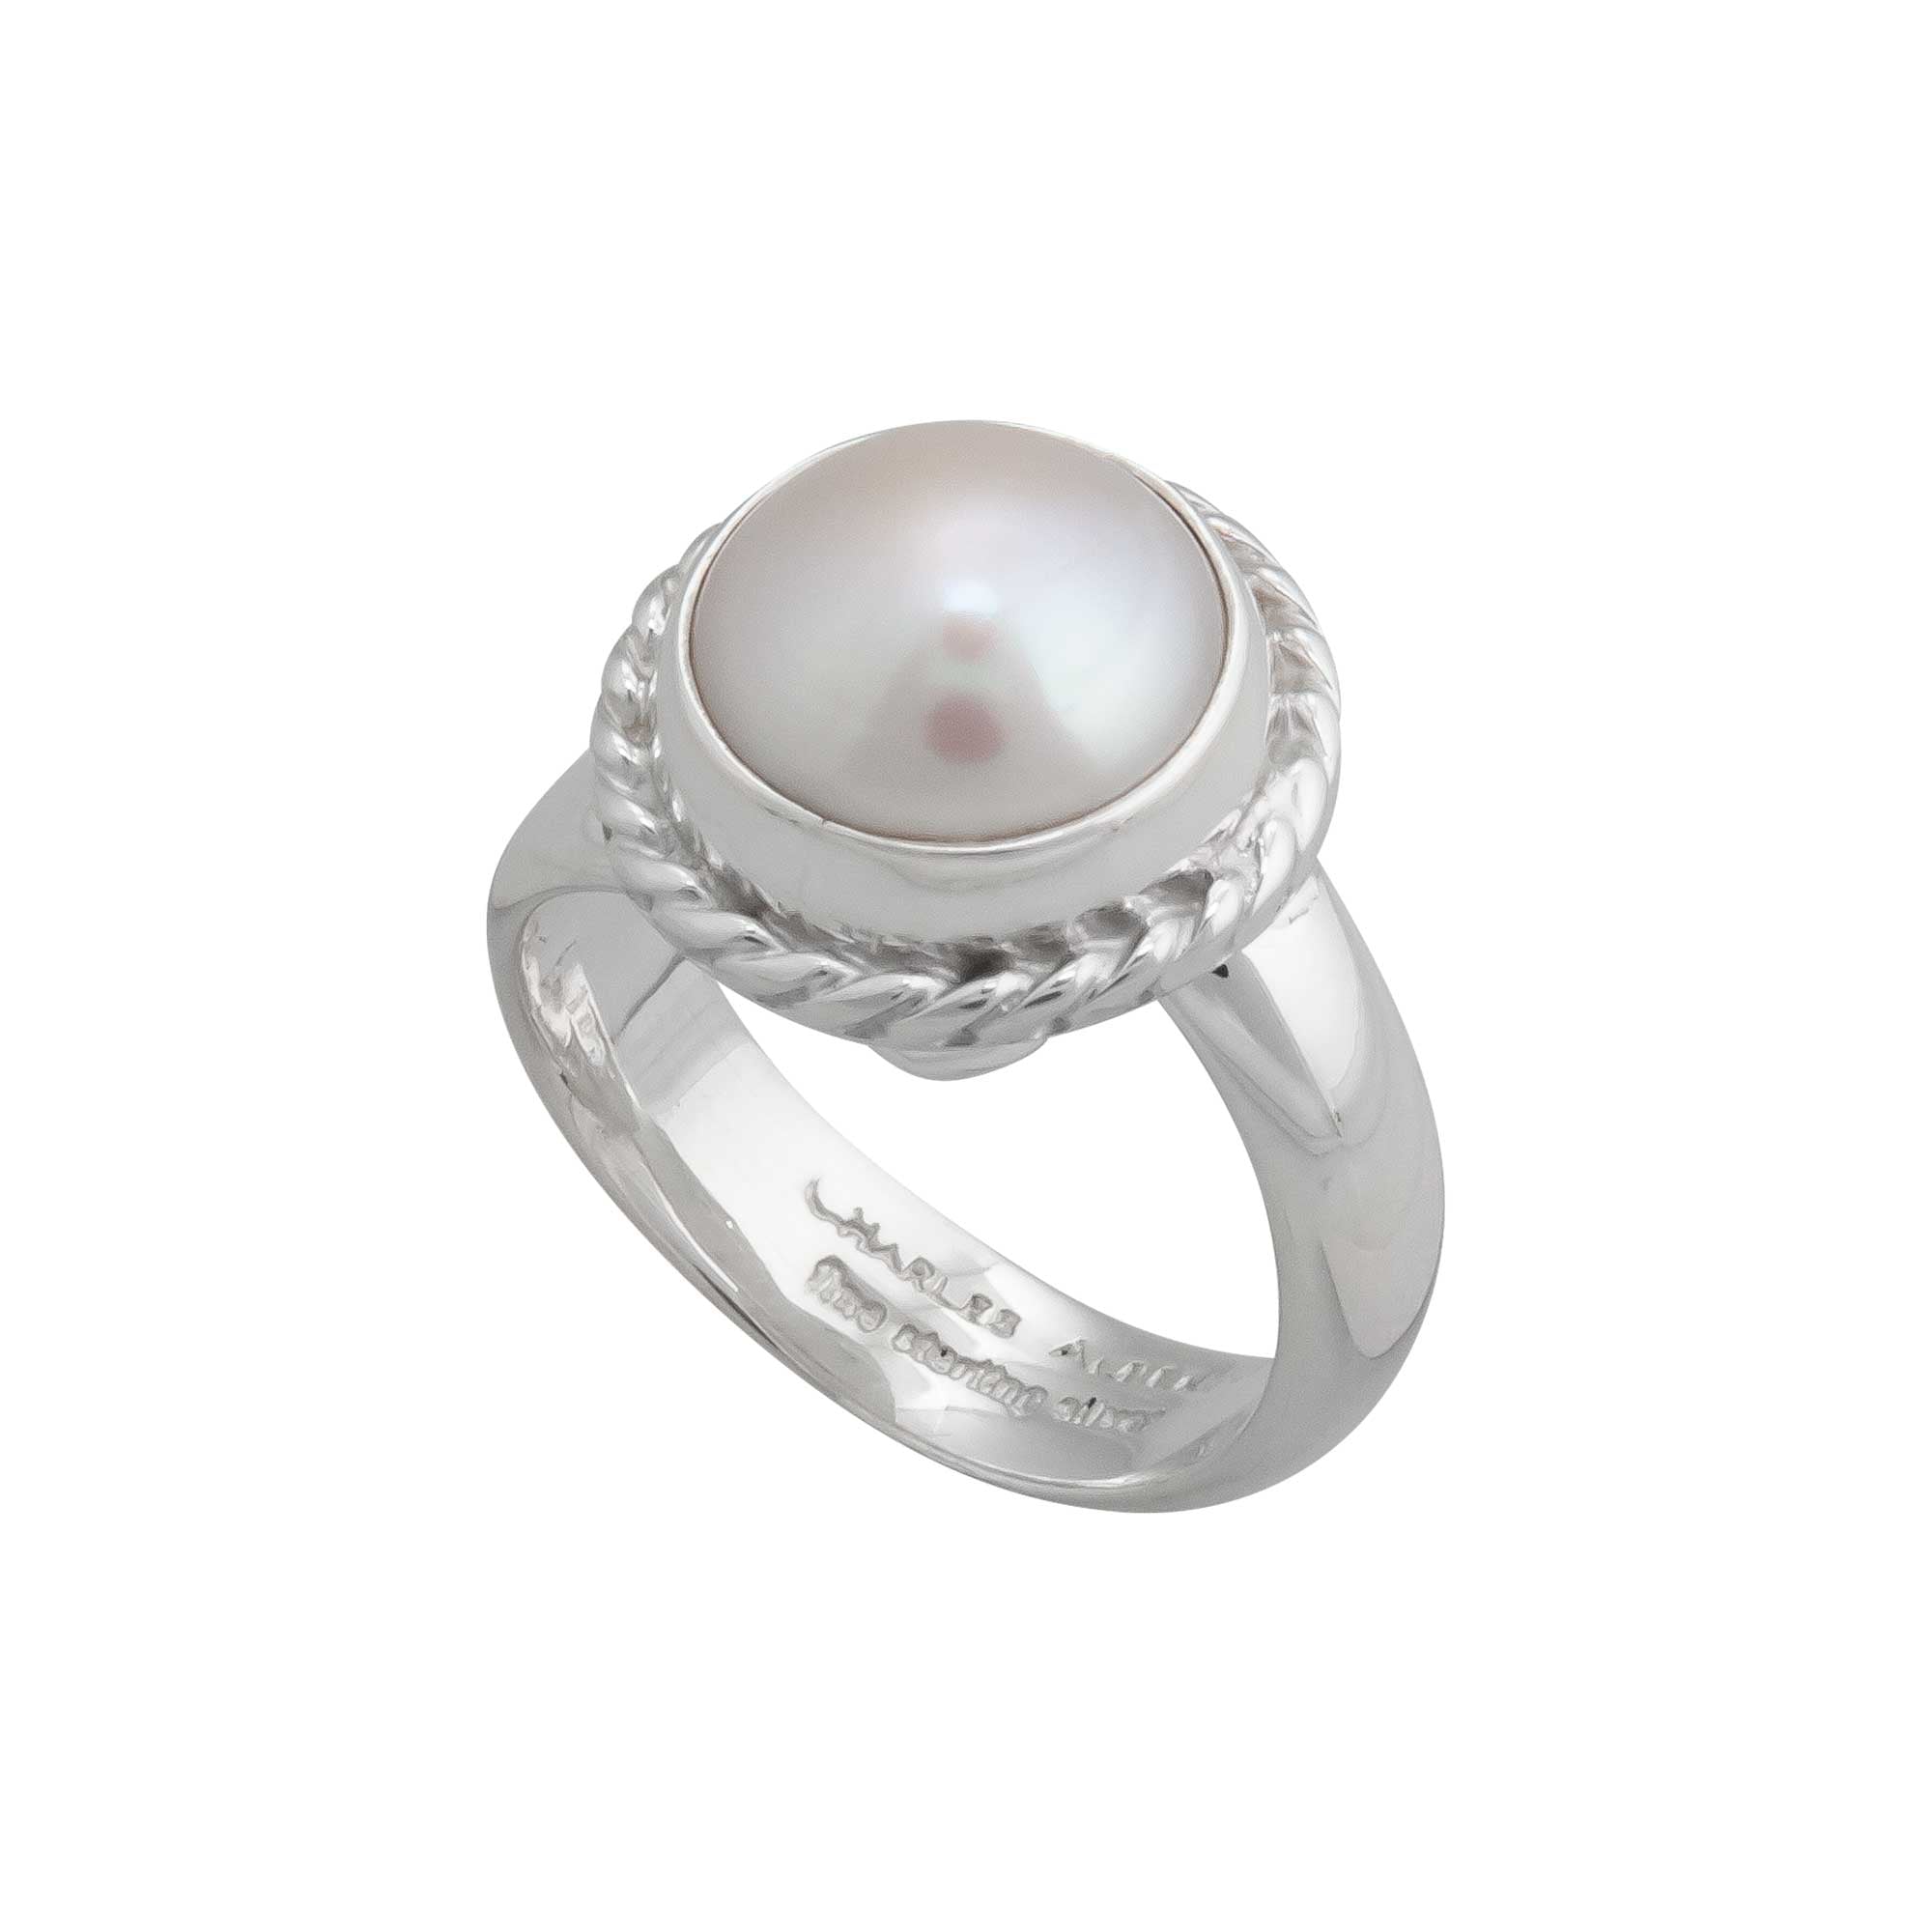 Buy Pearl Ring, Handmade Ring, 92.5% Sterling Silver Ring, Silver Pearl Ring,  925 Solid Sterling Silver Ring,fresh Water Pearl Ring, Boho Ring Online in  India - Etsy